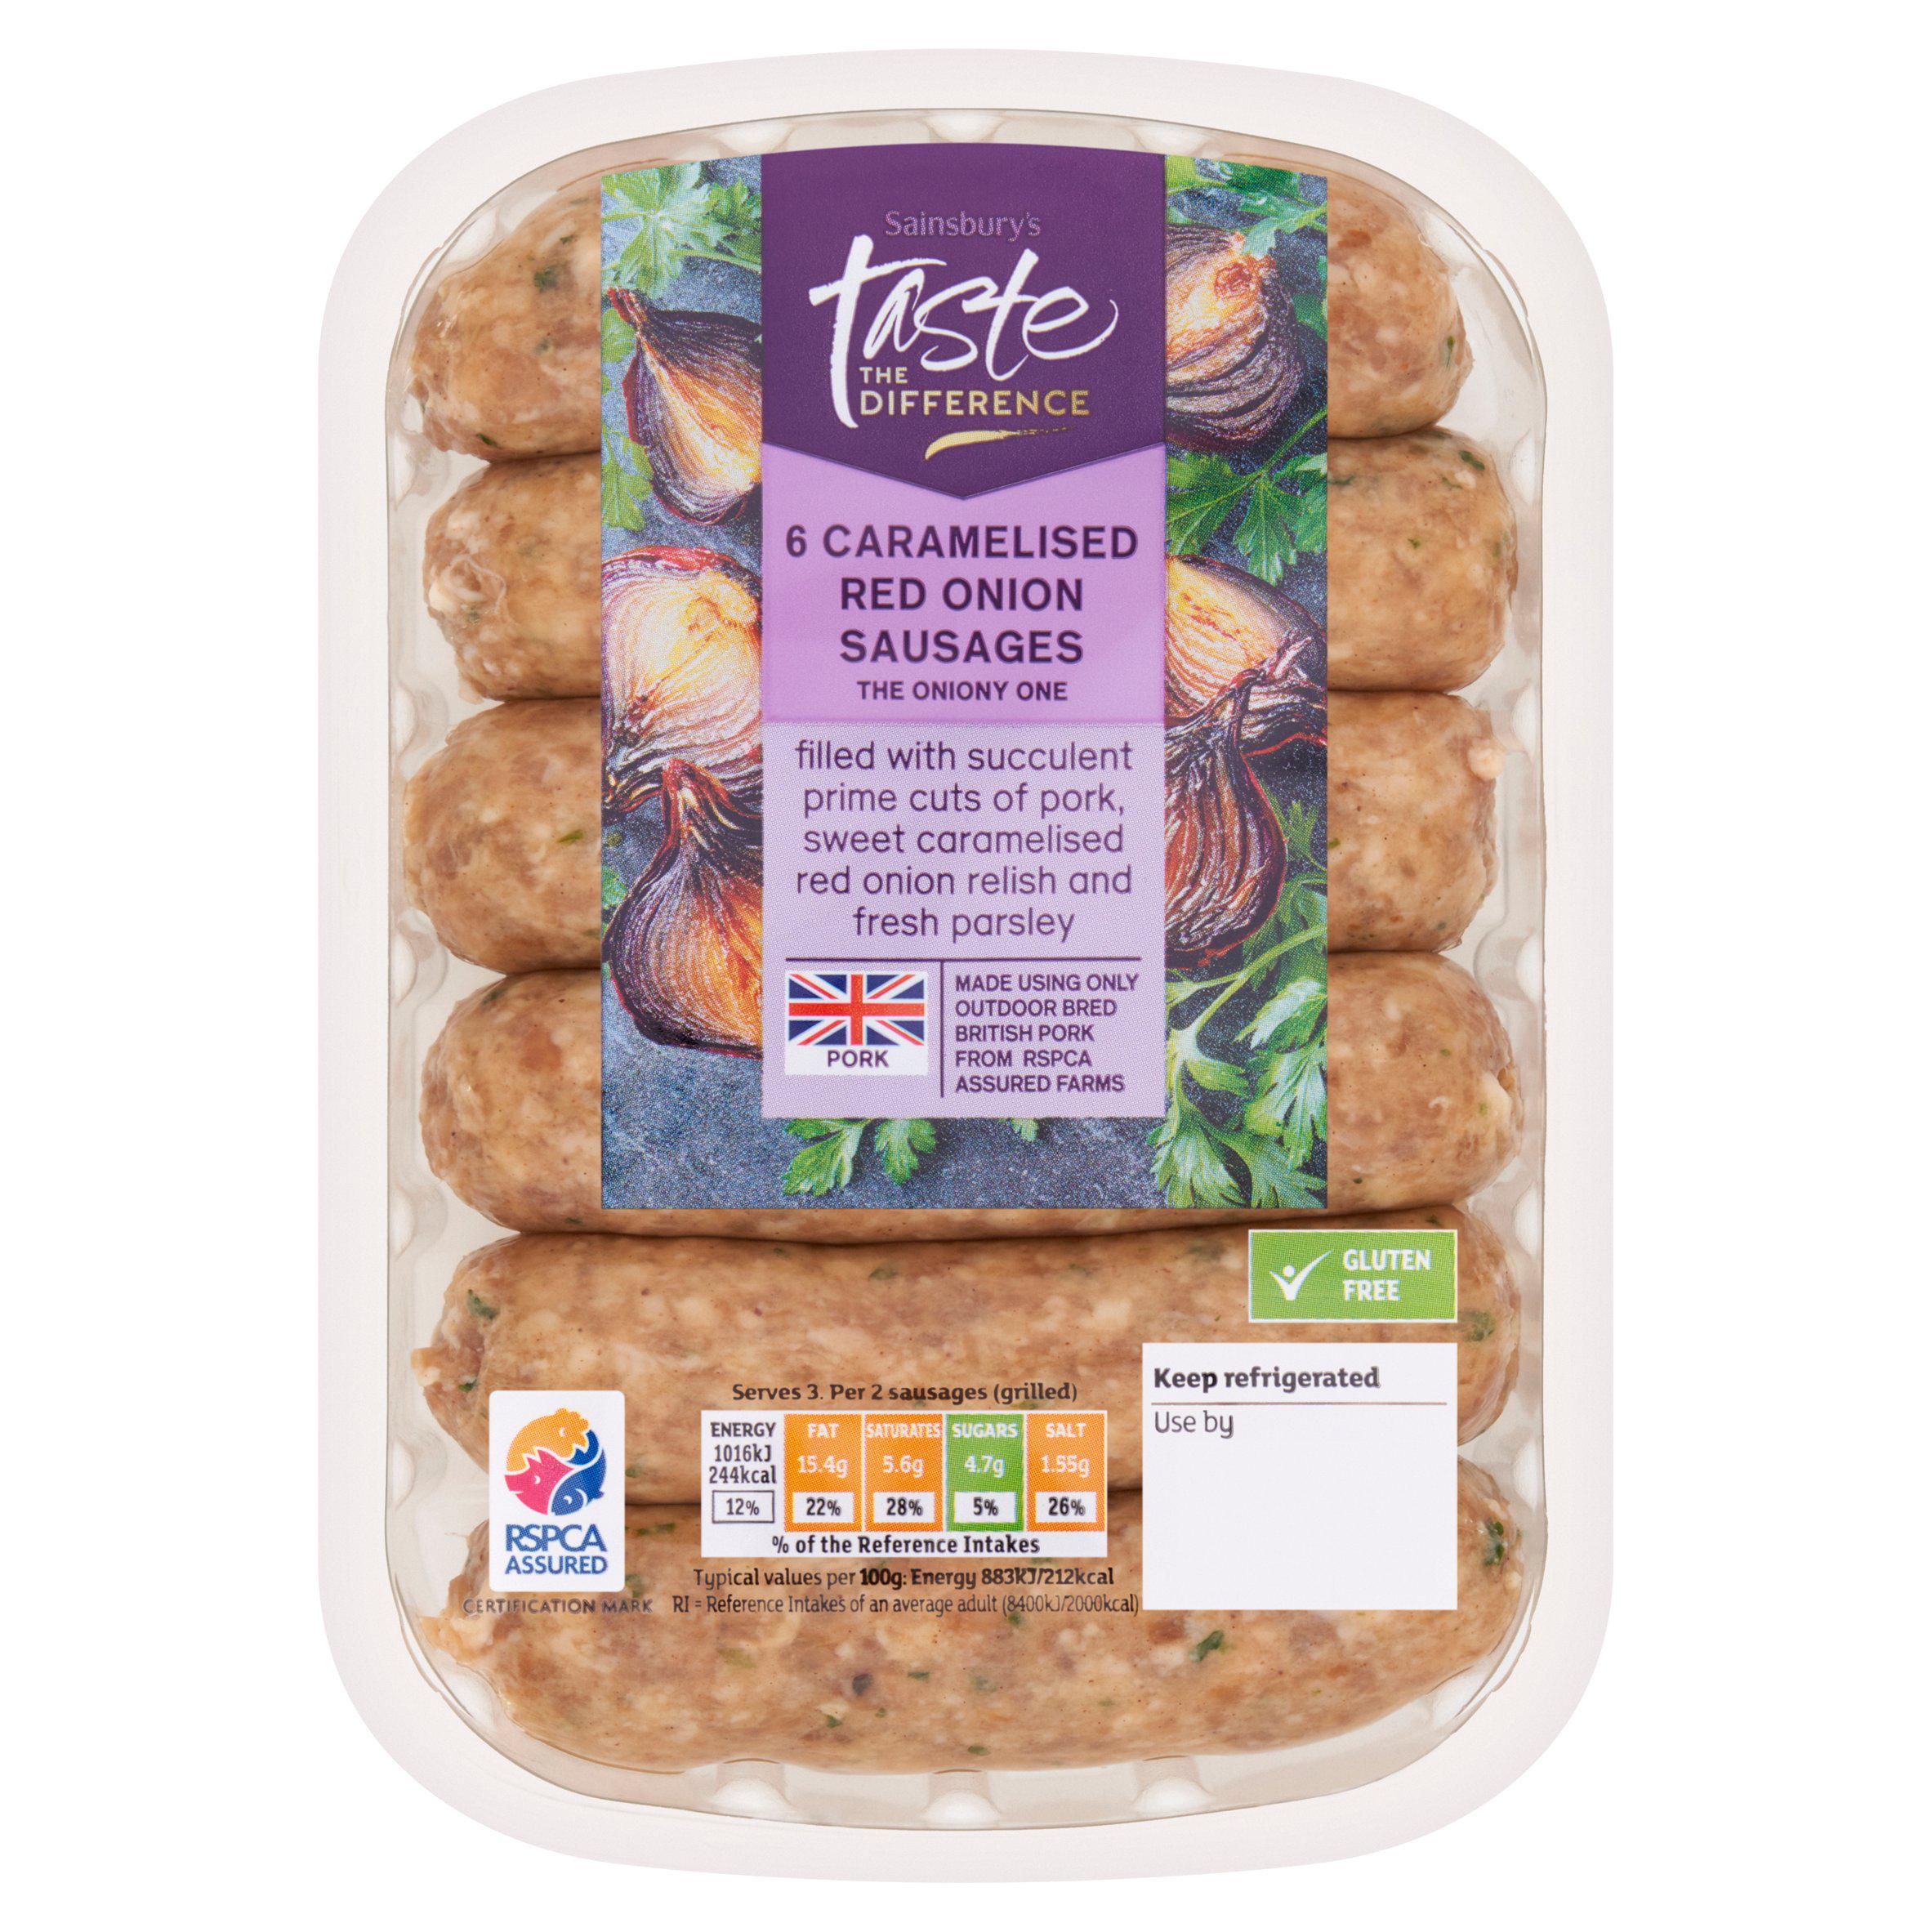 Sainsbury's British Pork and Red Onion Sausages, Taste the Difference x6 400g